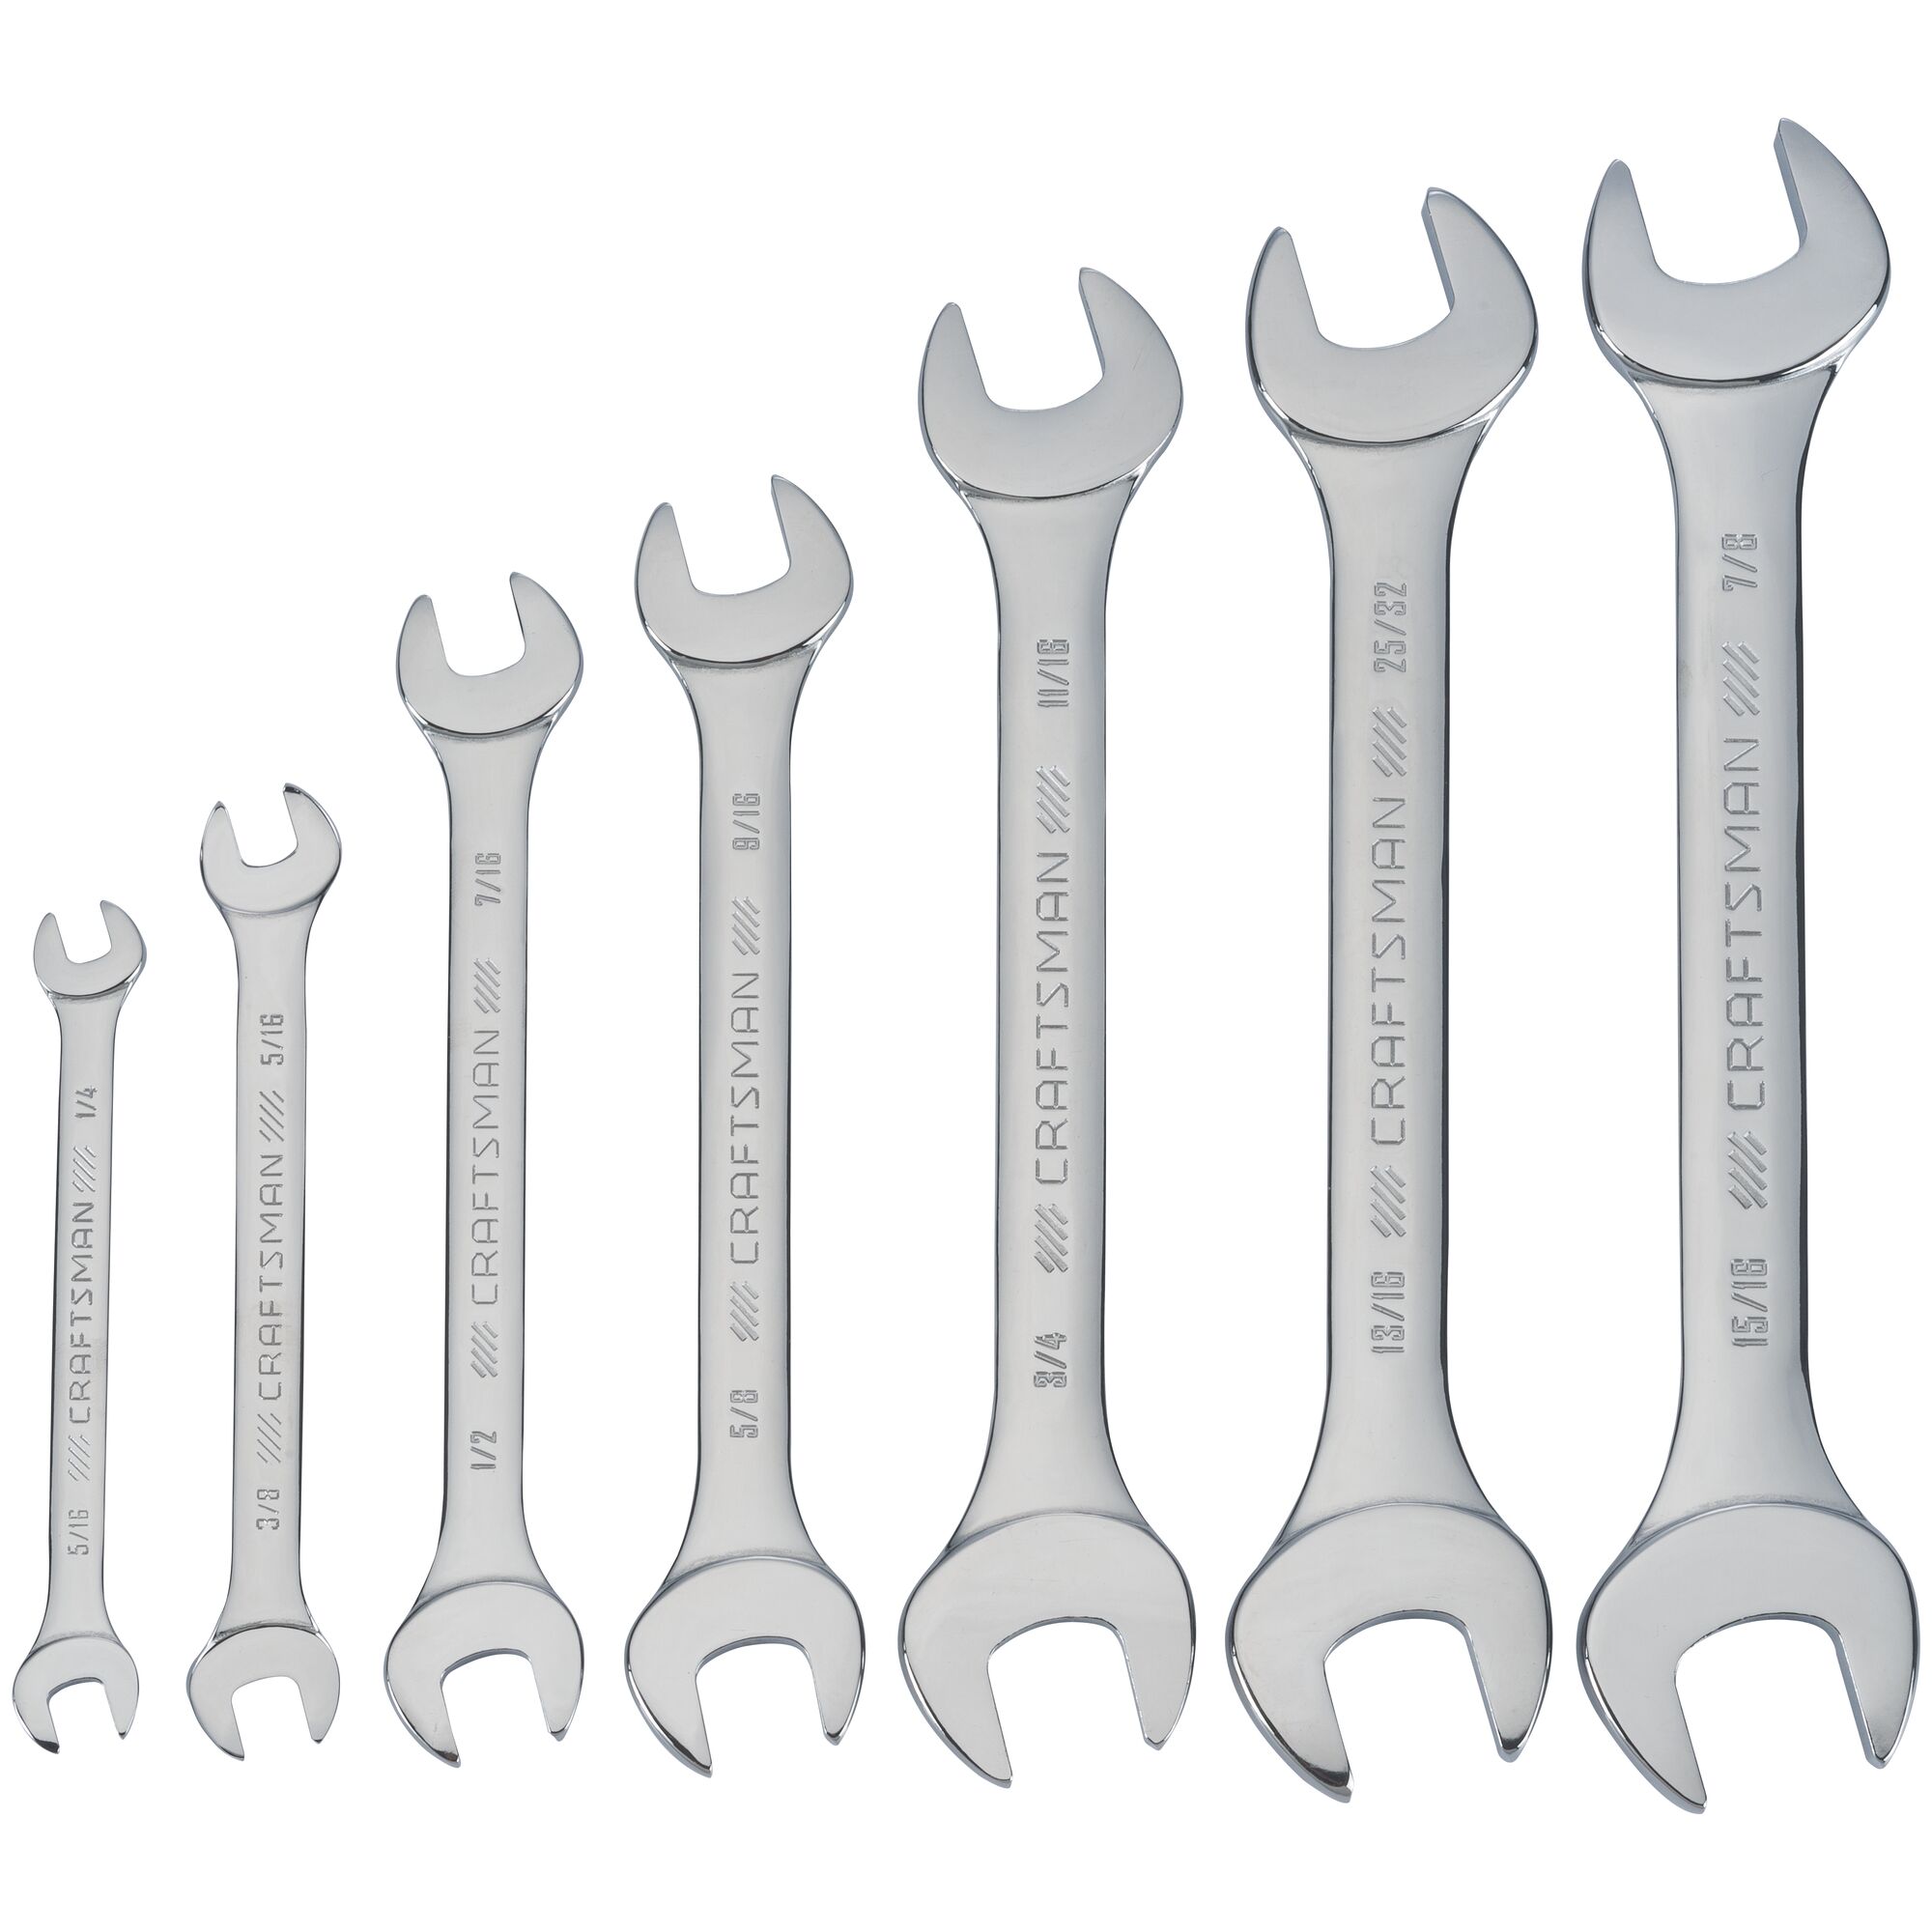 Right profile of 7 piece set standard S A E standard open end wrench set.